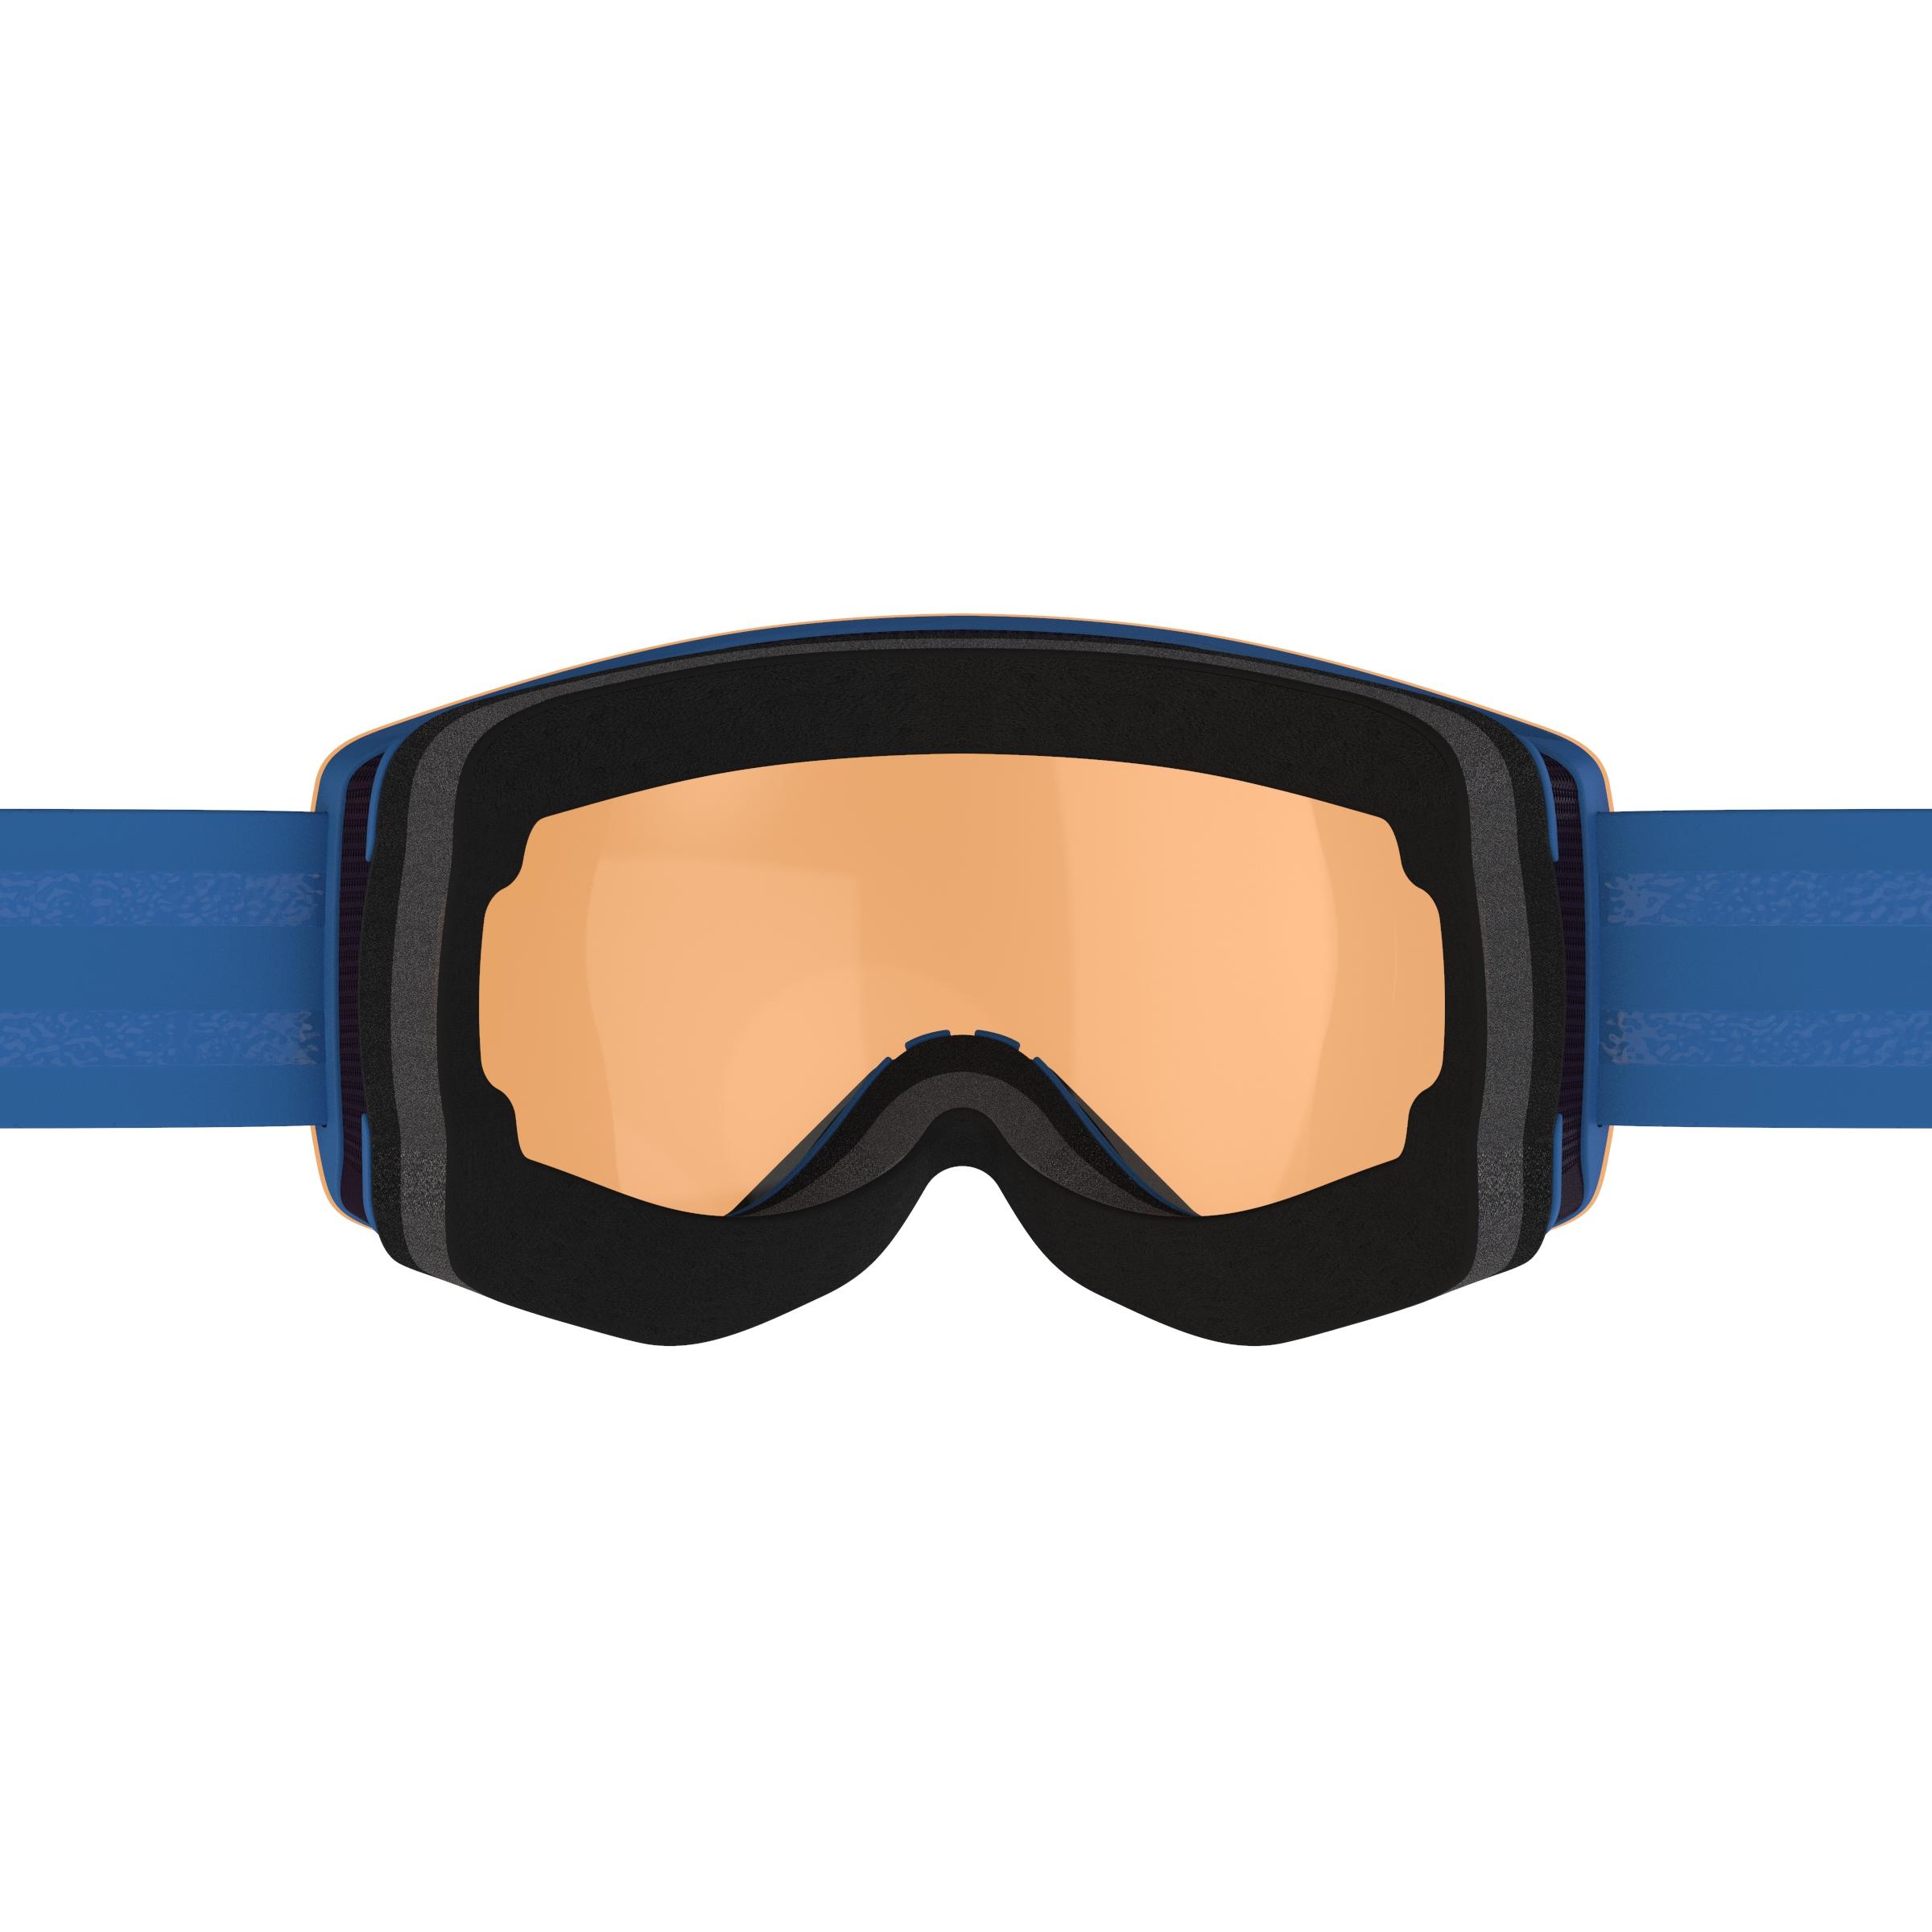 KIDS’ AND ADULT SKIING AND SNOWBOARDING GOGGLES  GOOD WEATHER G 900 FL - BLUE 5/6